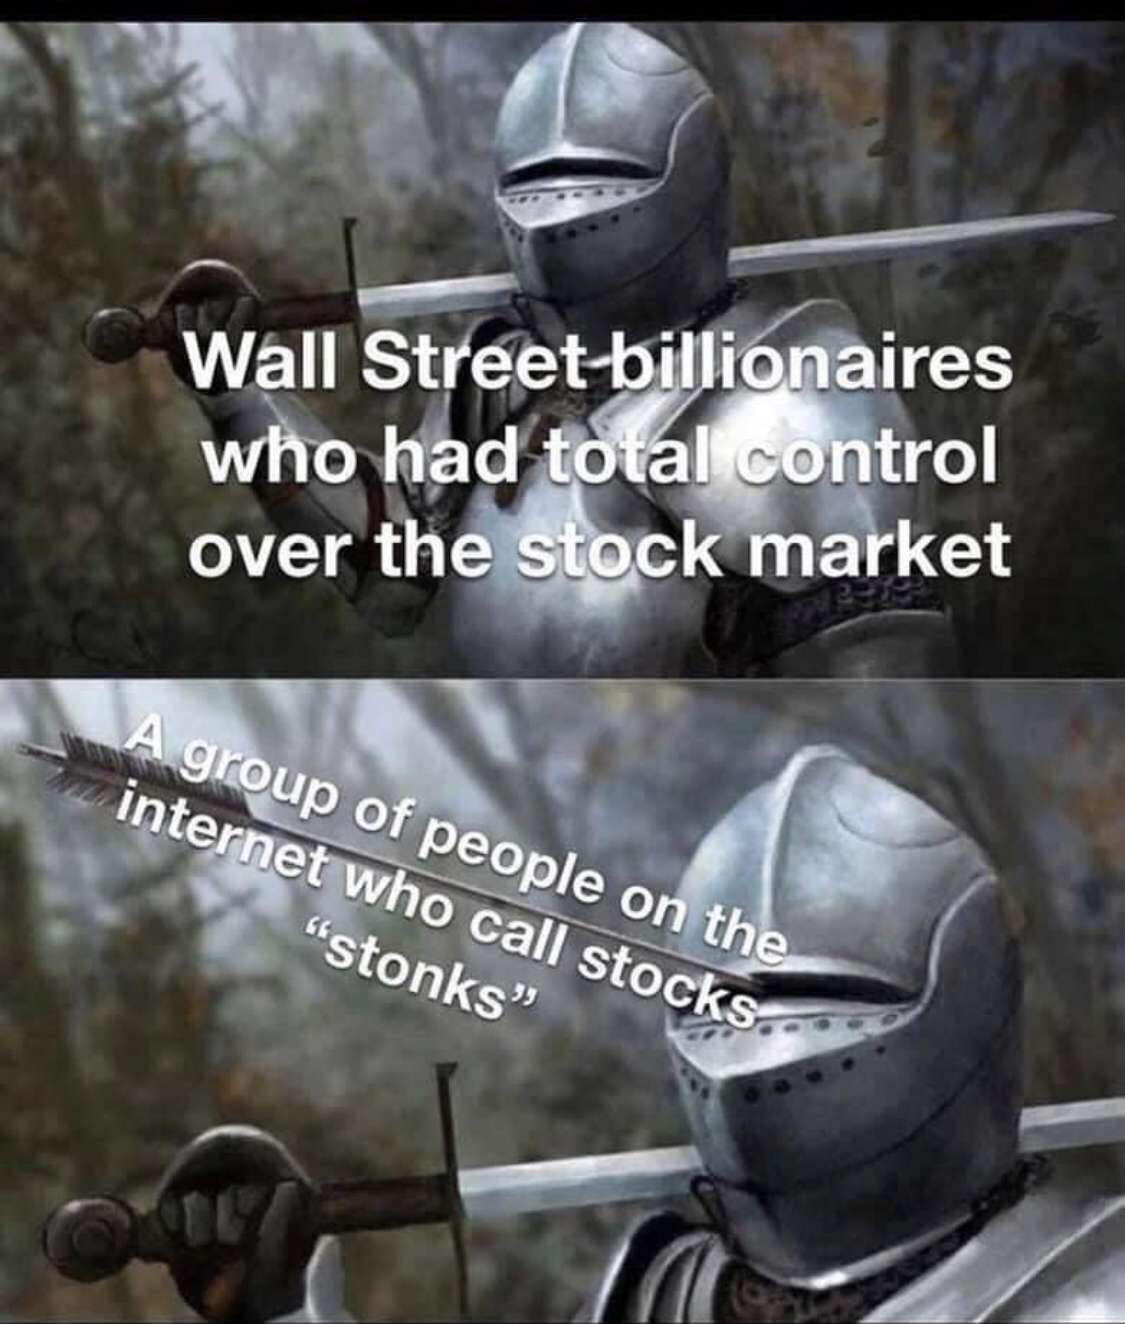 funny memes and pics - my first breath breathing addiction - Wall Streetbillionaires who had total control over the stock market A group of people on the internet who call stocks "stonks"